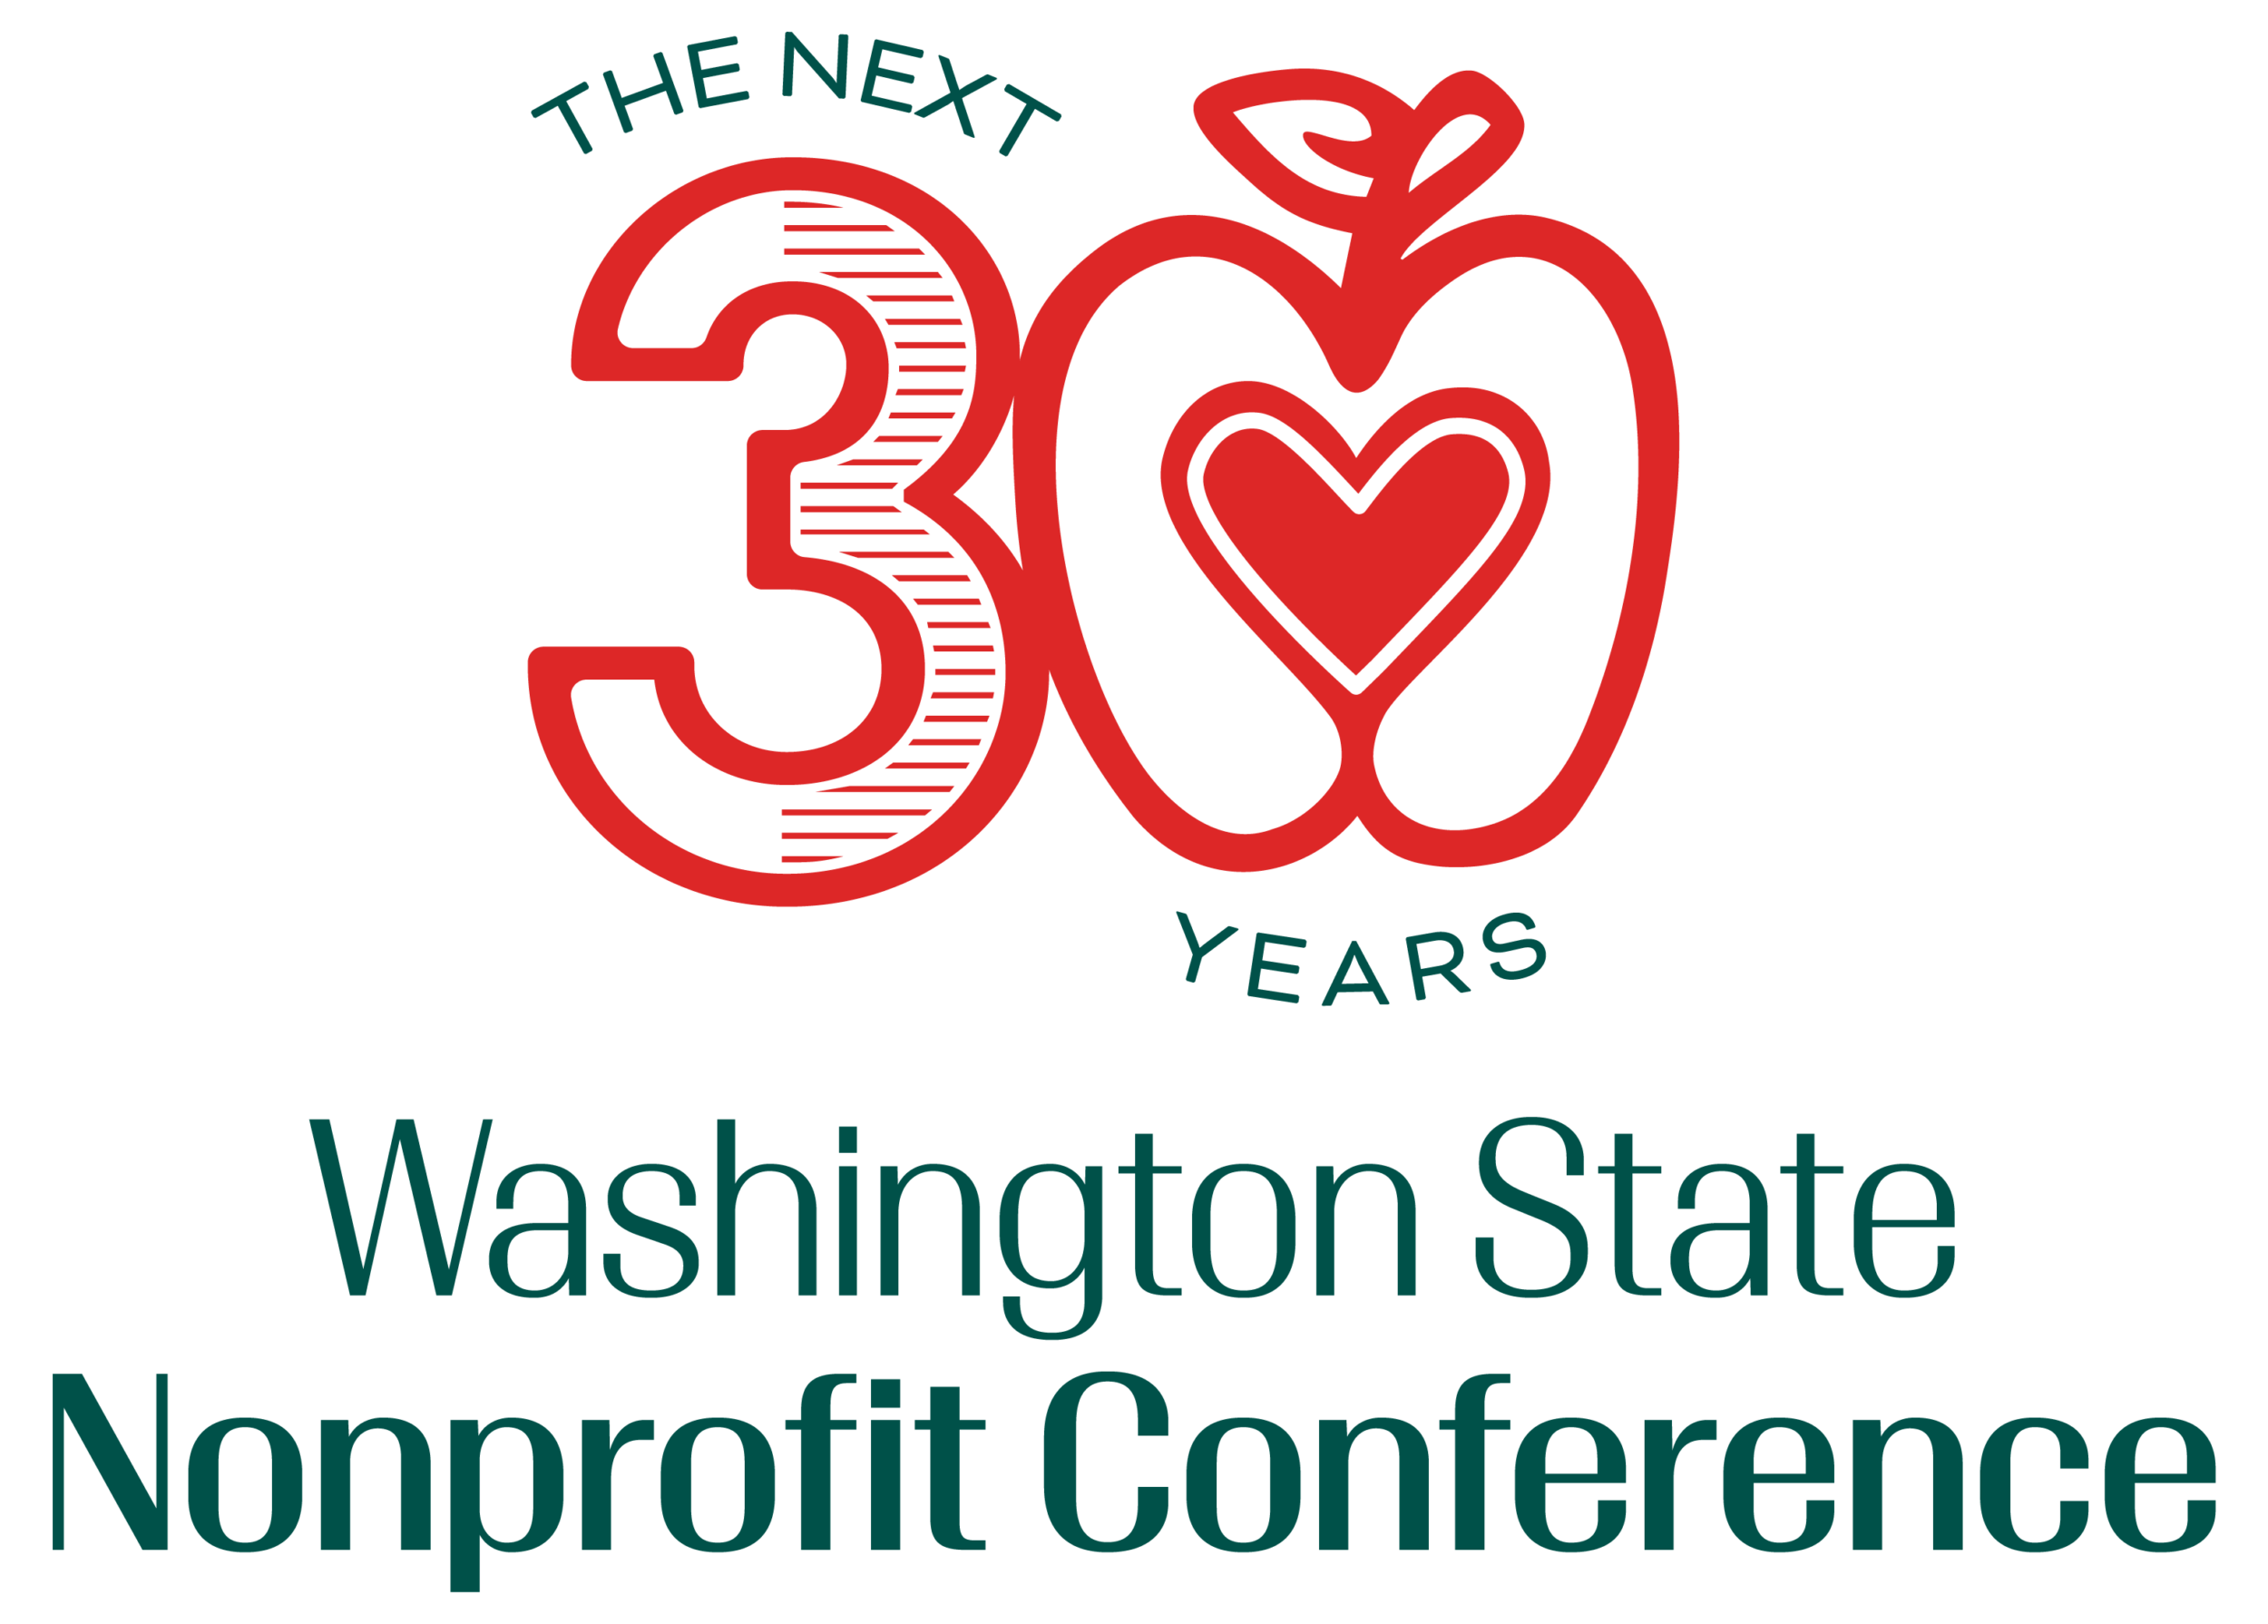 The Next Thirty Years, Washington State Nonprofit Conference